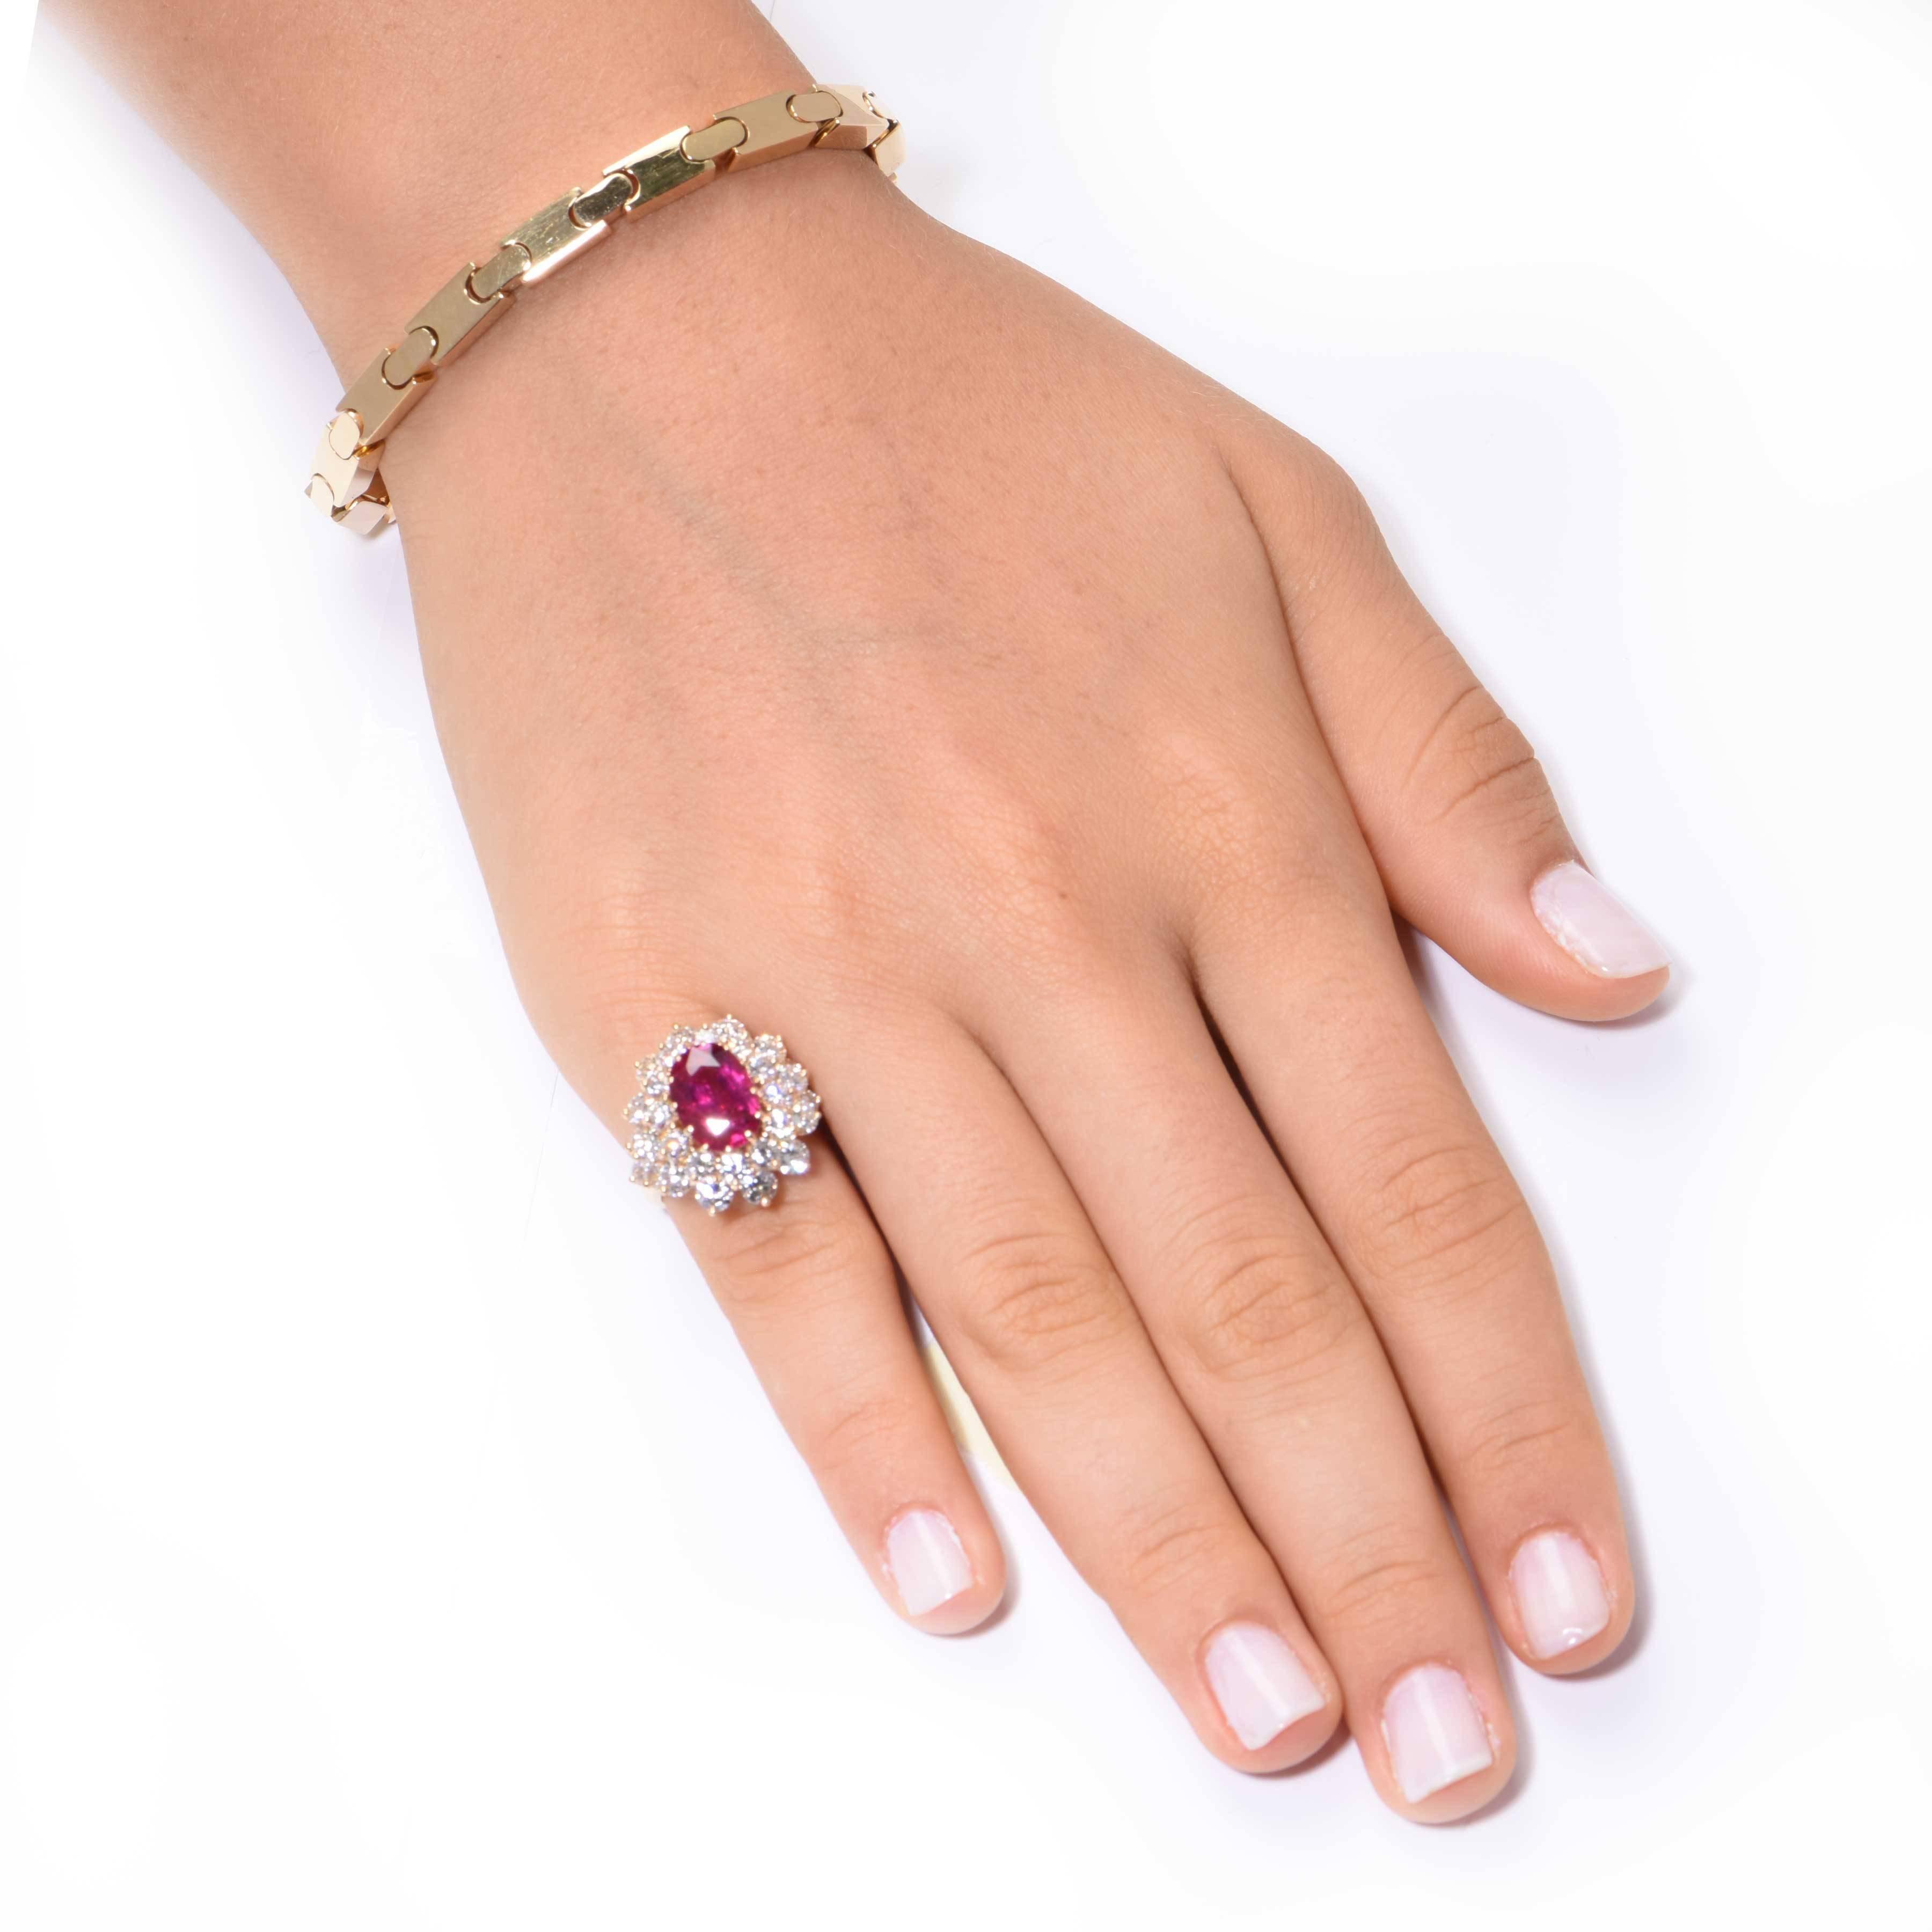 This ruby and diamond ring features a 3.70 carats no heat Burmese oval ruby, surrounded by round diamonds weighing approximately 2.70 carats. Comes with AGL report stating that the ruby is of Burmese origin, with no indications of heating.
Size 4